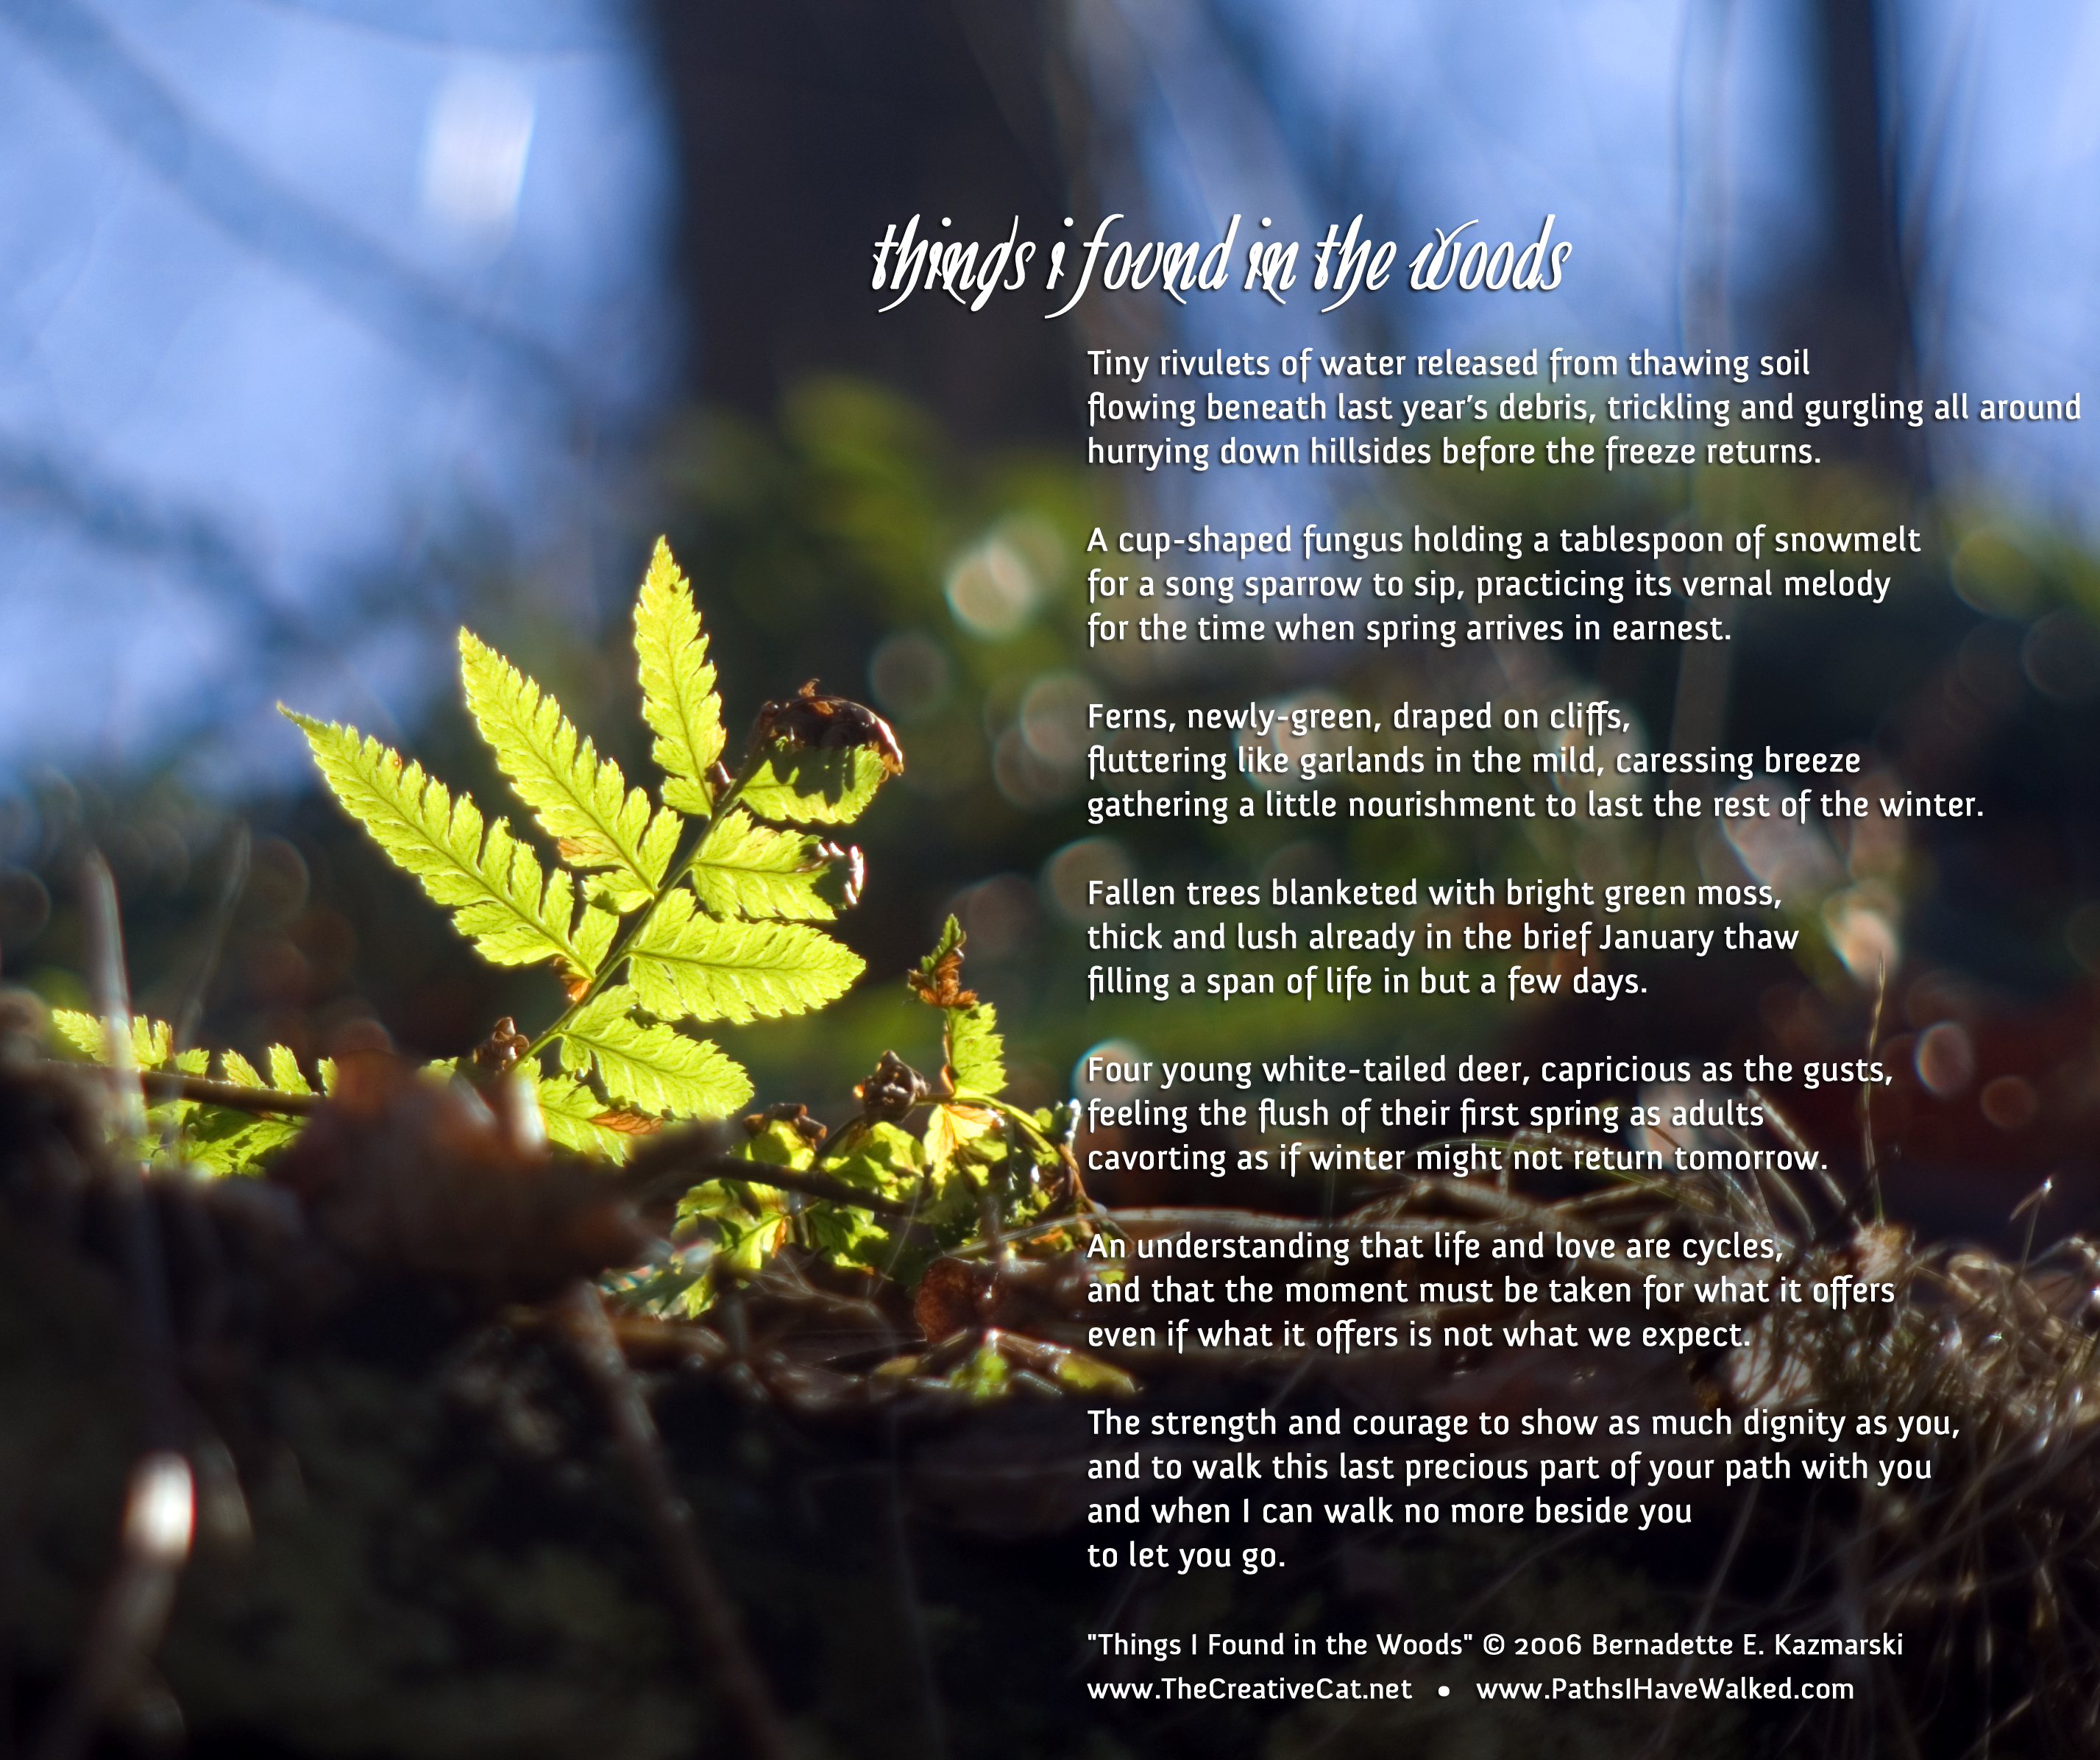 "Things I Found in the Woods" image and poem.